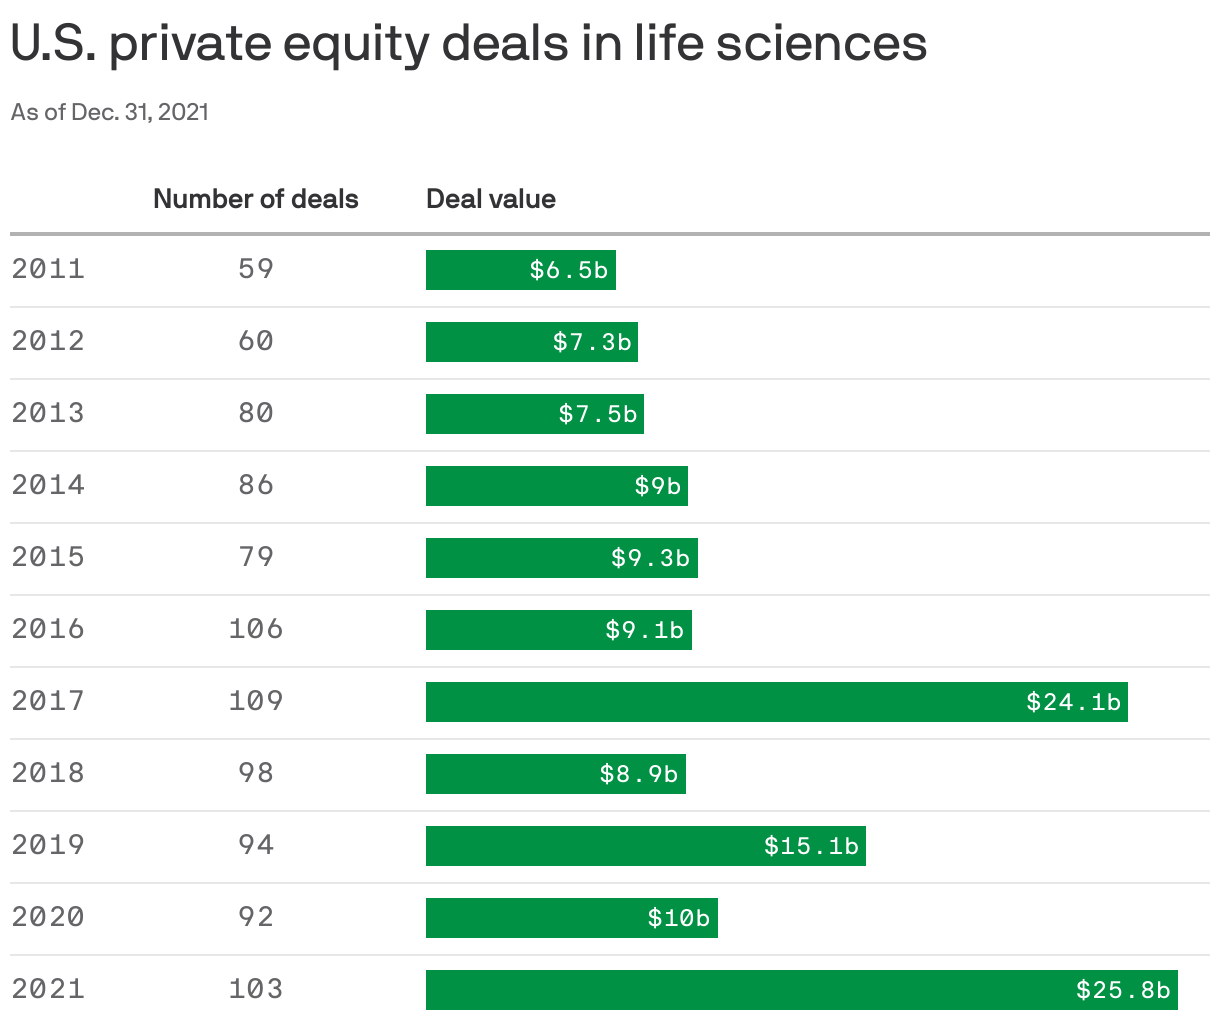 U.S. private equity deals in life sciences